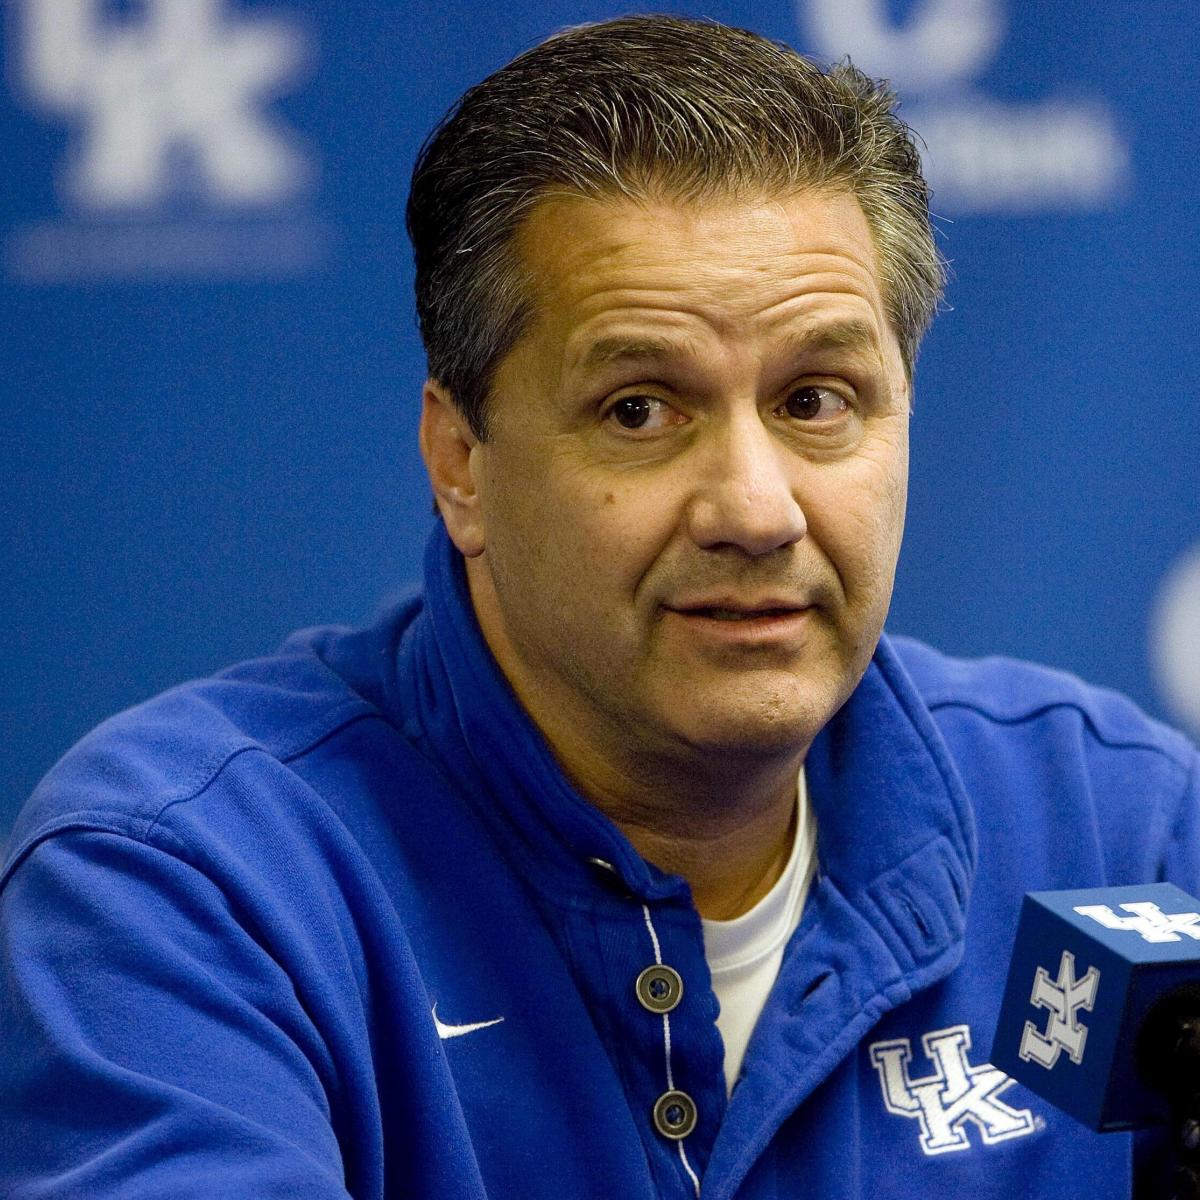 Kentucky Basketball Ranking Each of the Recruits Coach Cal Is Pursuing